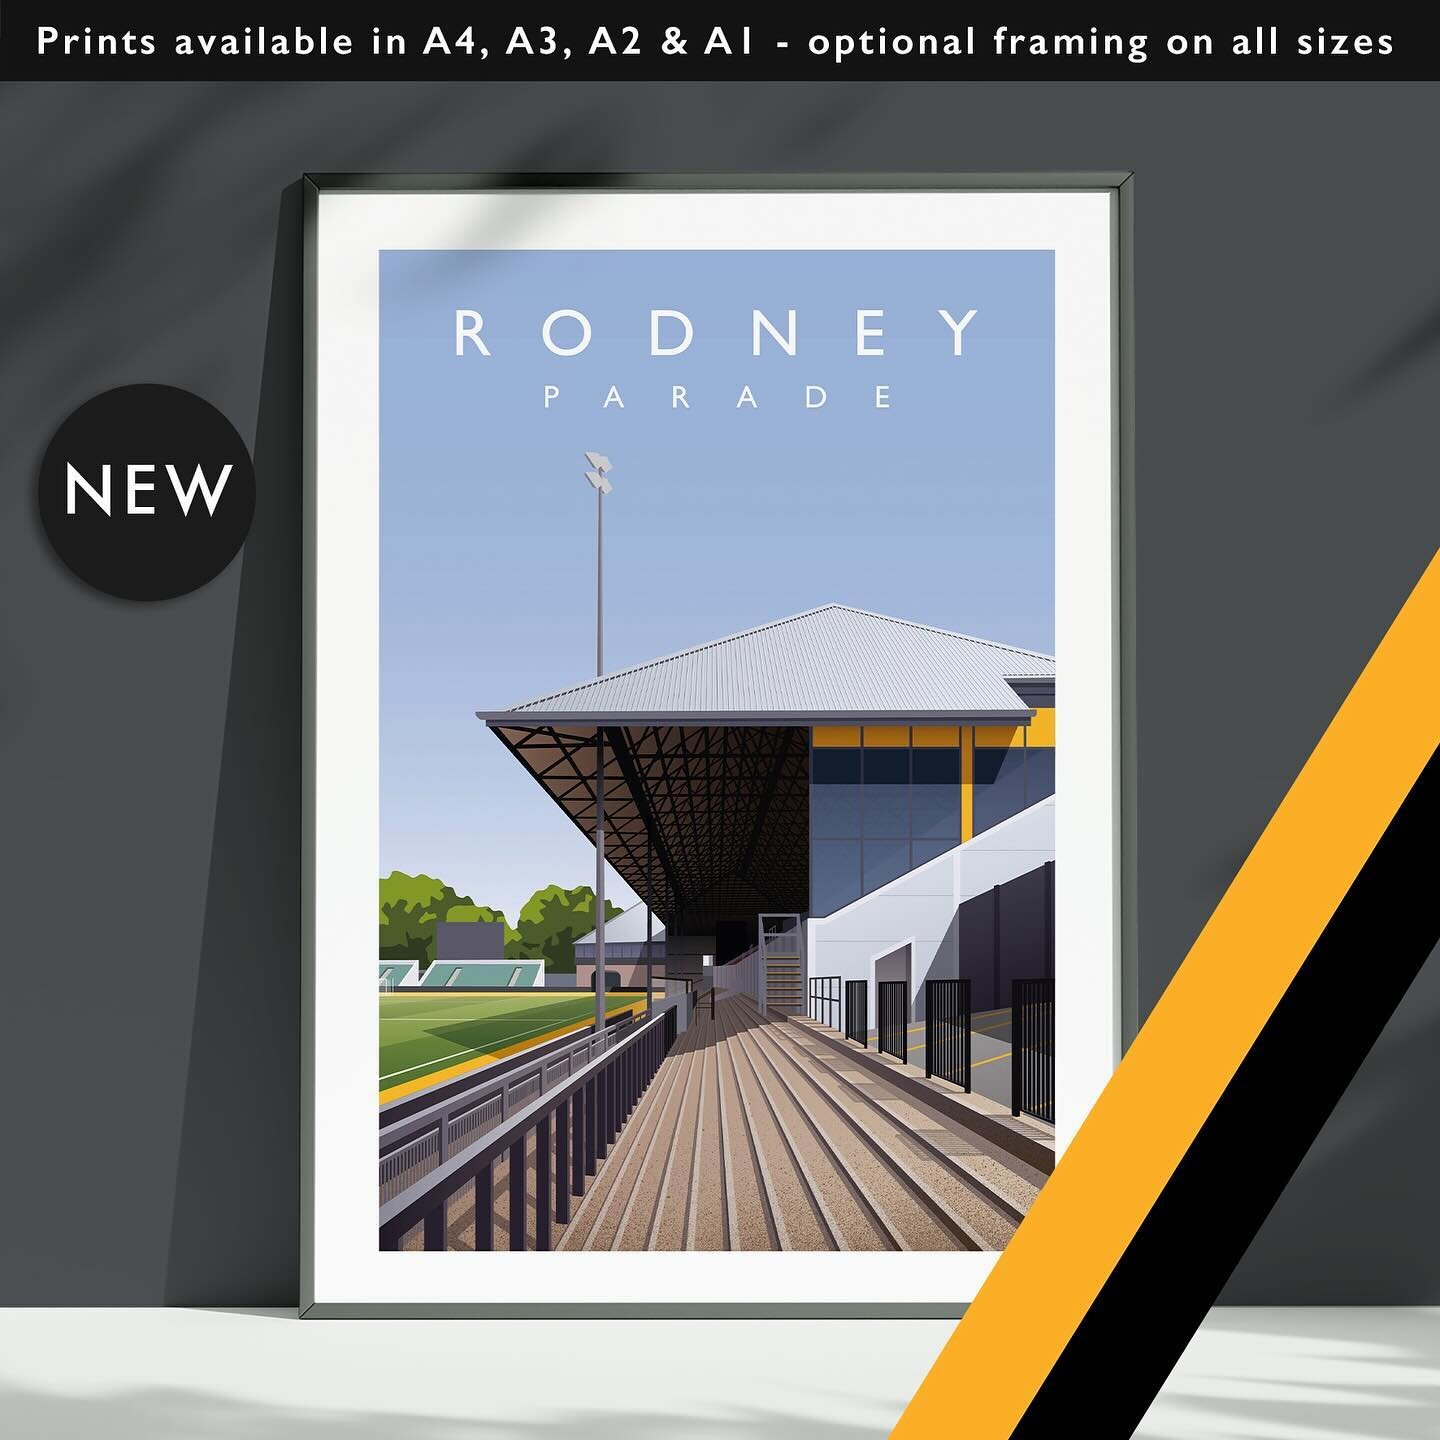 NEW: Rodney Parade 

Prints available in A4, A3, A2 &amp; A1 with optional framing 

Get 10% off until midnight with the discount code 
THE-EXILES

Visit: matthewjiwood.com/league-two-gro&hellip;

#Newport #NCAFC #Exiles #footy #football #footballart